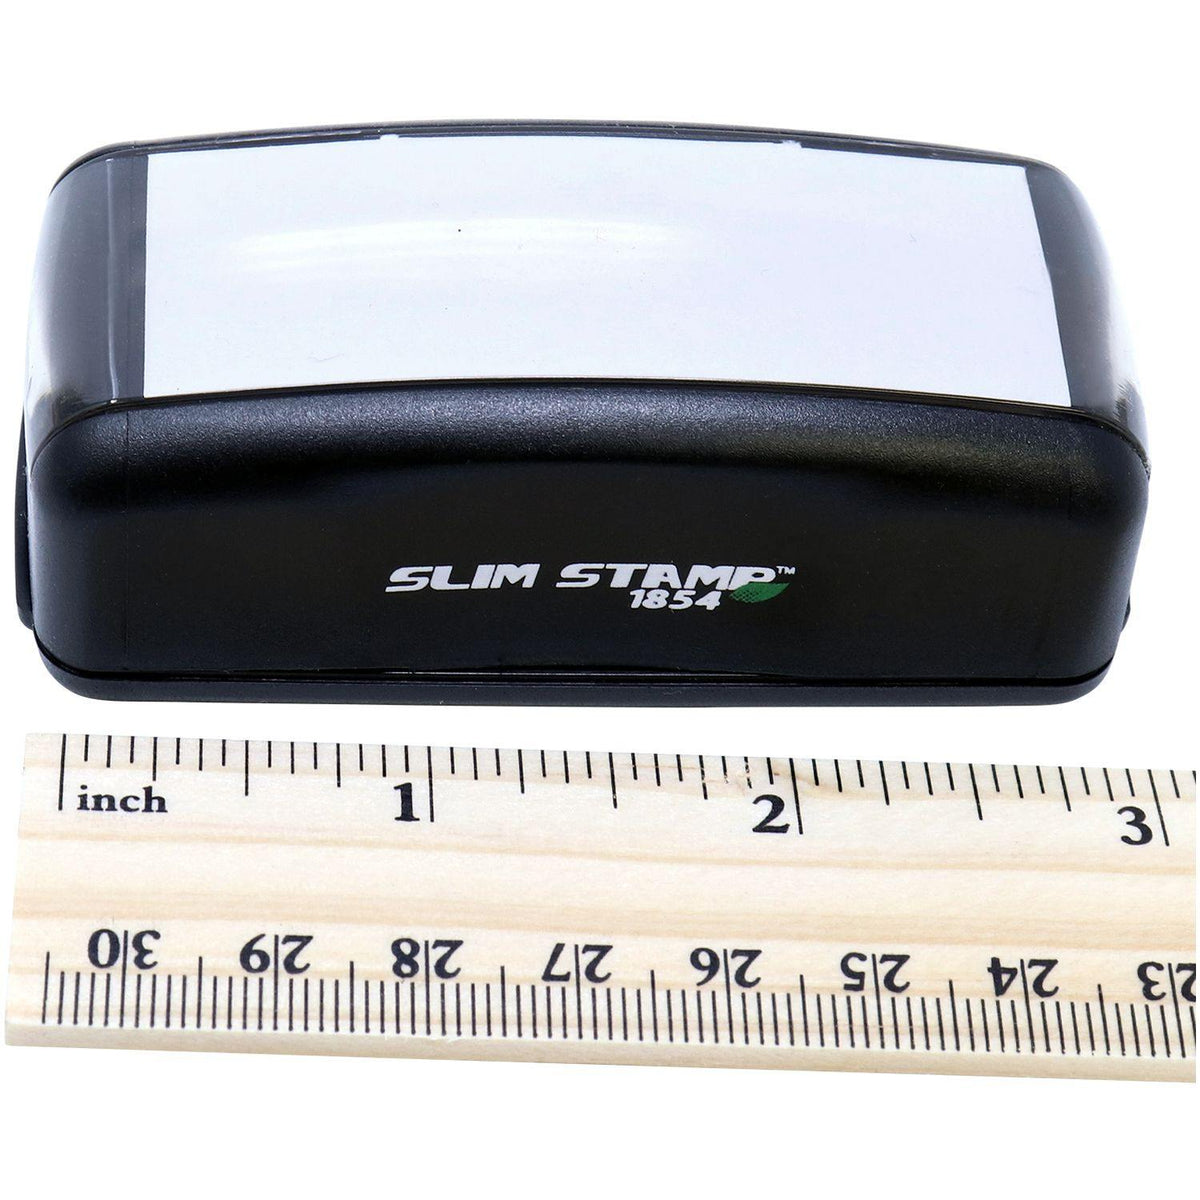 Measurement Large Pre Inked Evidence Stamp with Ruler